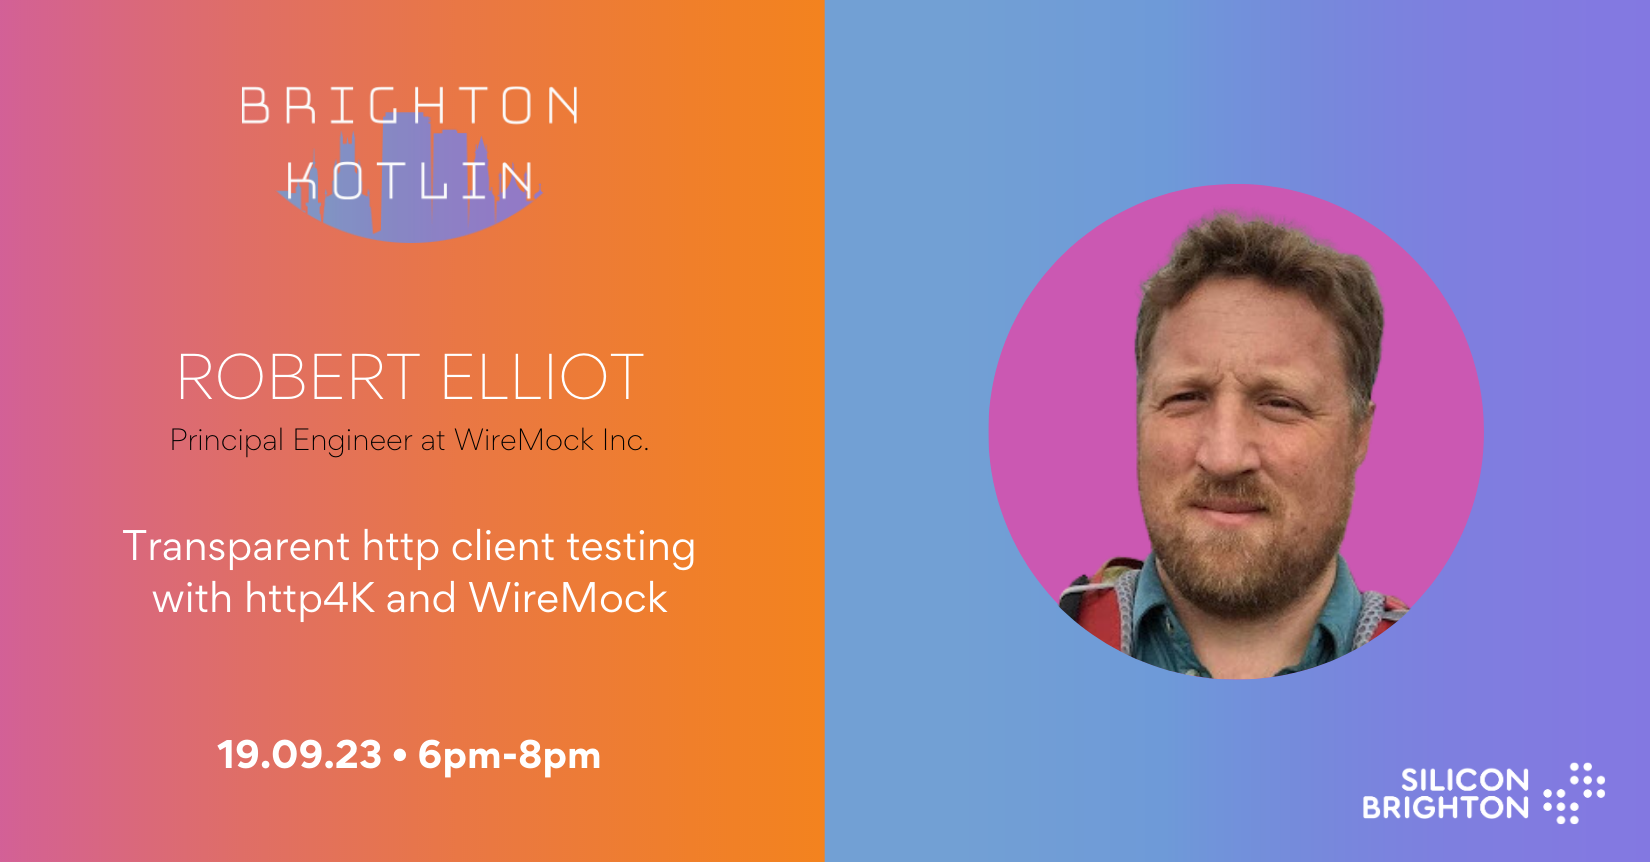 Brighton Kotlin: Transparent http client testing with http4K and WireMock